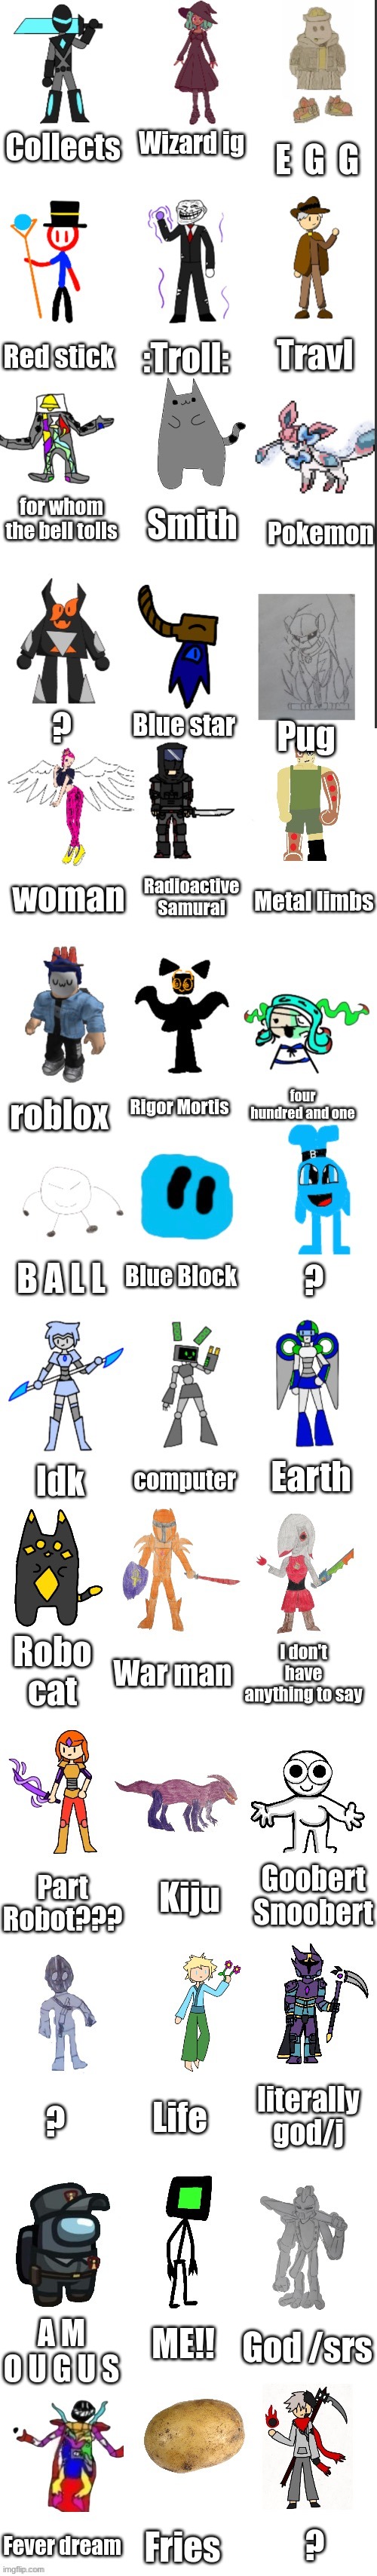 Jhon's opinion (shutpost ver.) | E  G  G; Wizard ig; Collects; :Troll:; Red stick; Travl; for whom the bell tolls; Smith; Pokemon; Blue star; ? Pug; woman; Radioactive Samurai; Metal limbs; Rigor Mortis; four hundred and one; roblox; Blue Block; B A L L; ? Earth; computer; Idk; Robo cat; War man; I don't have anything to say; Kiju; Goobert Snoobert; Part Robot??? ? literally god/j; Life; ME!! A M O U G U S; God /srs; ? Fries; Fever dream | image tagged in nugget s pretty basic imgflip-bossfights oc list | made w/ Imgflip meme maker